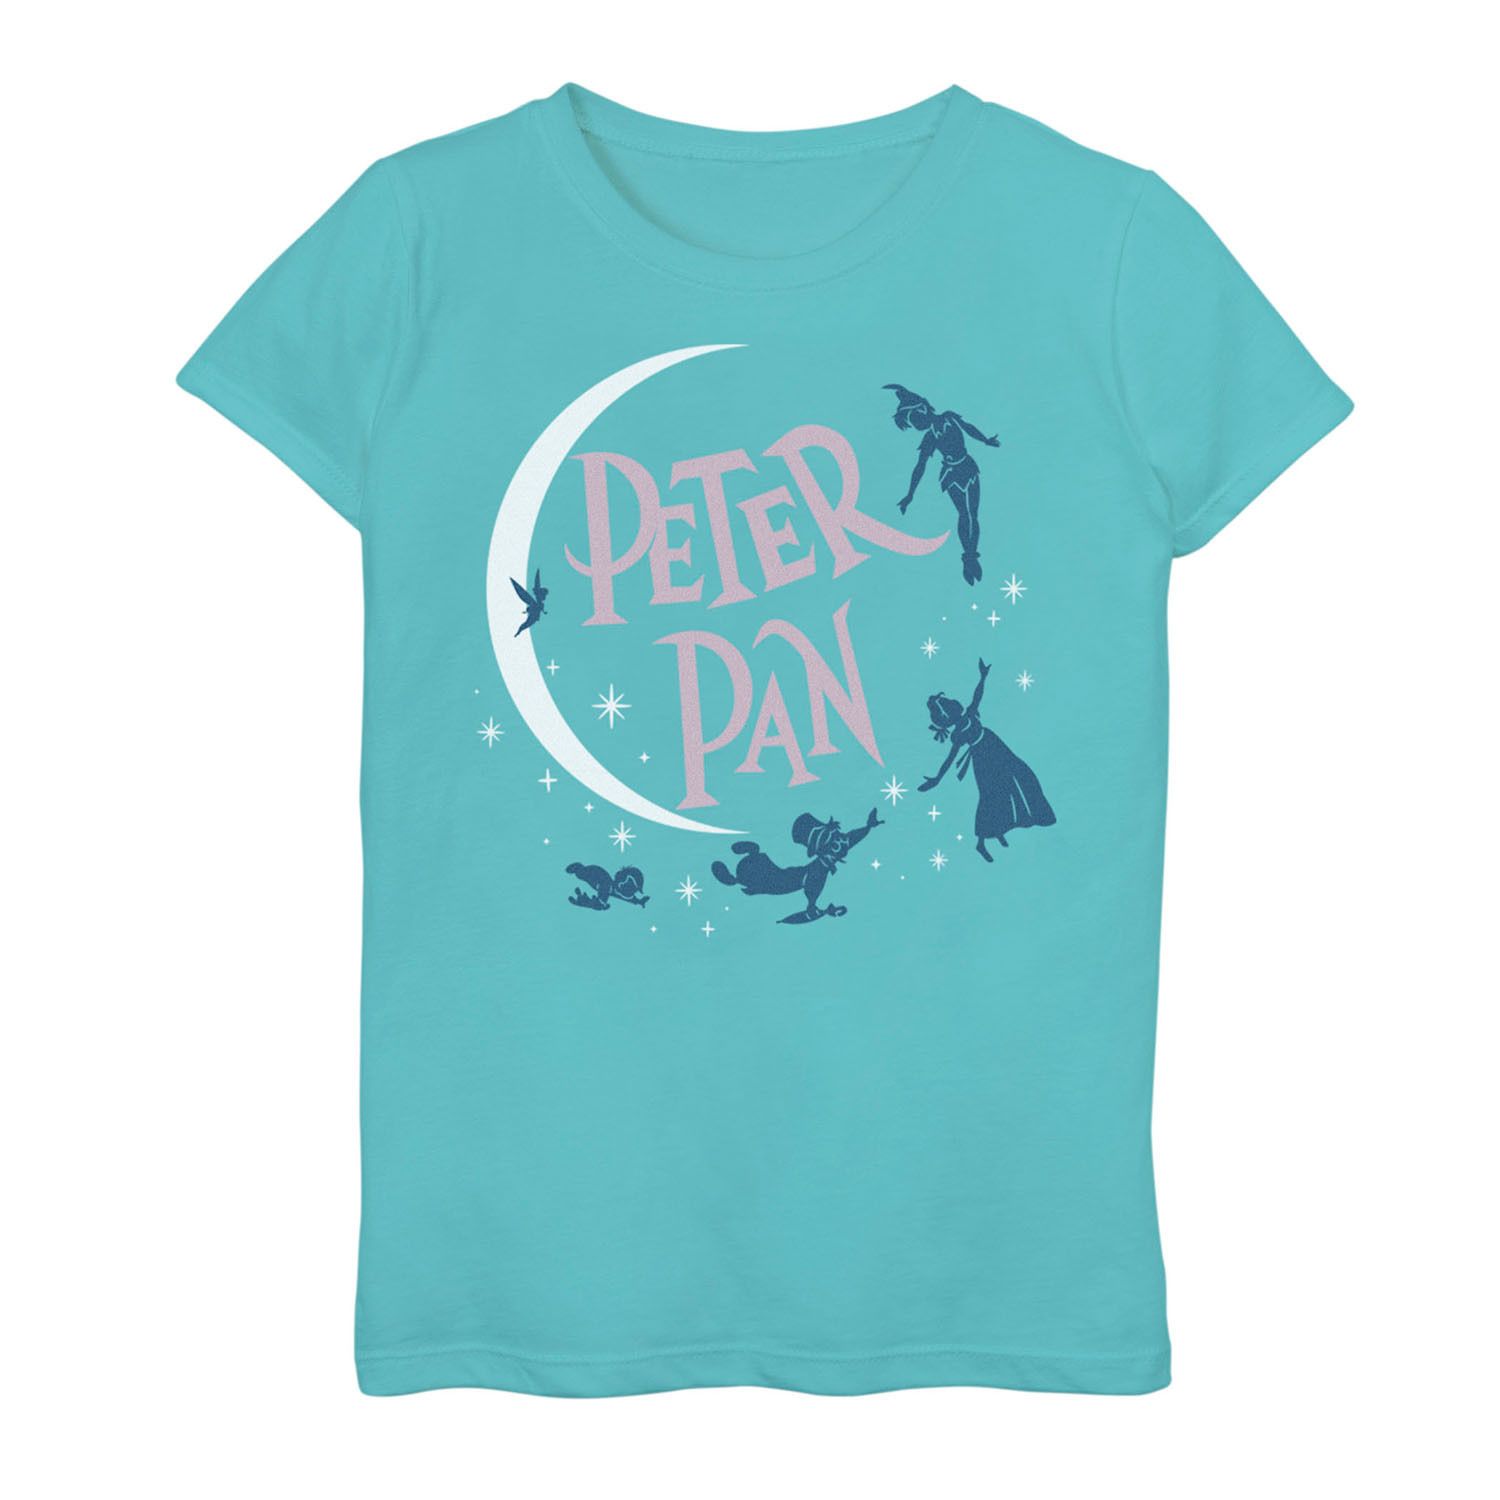 Image for Disney Girls 7-16 Peter Pan Crescent Moon Graphic Tee at Kohl's.